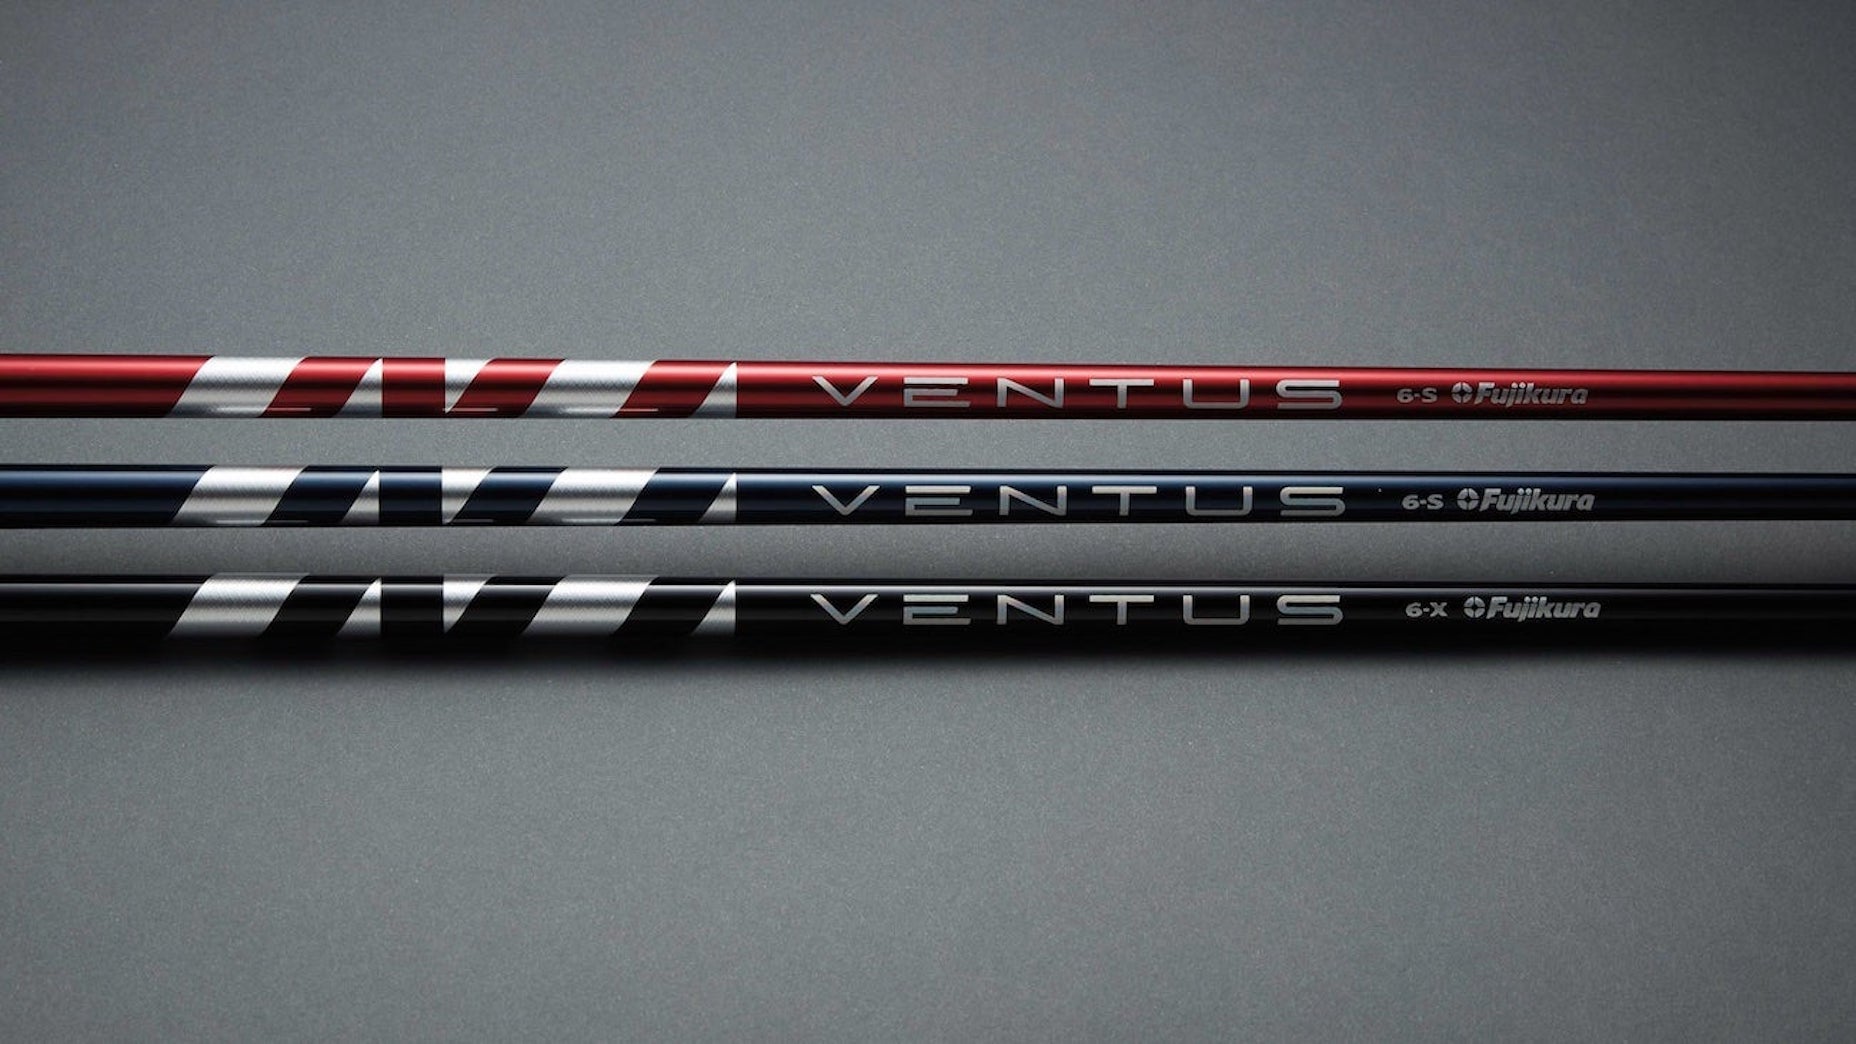 Red, Blue or Black? The differences between Fujikura's Ventus shafts